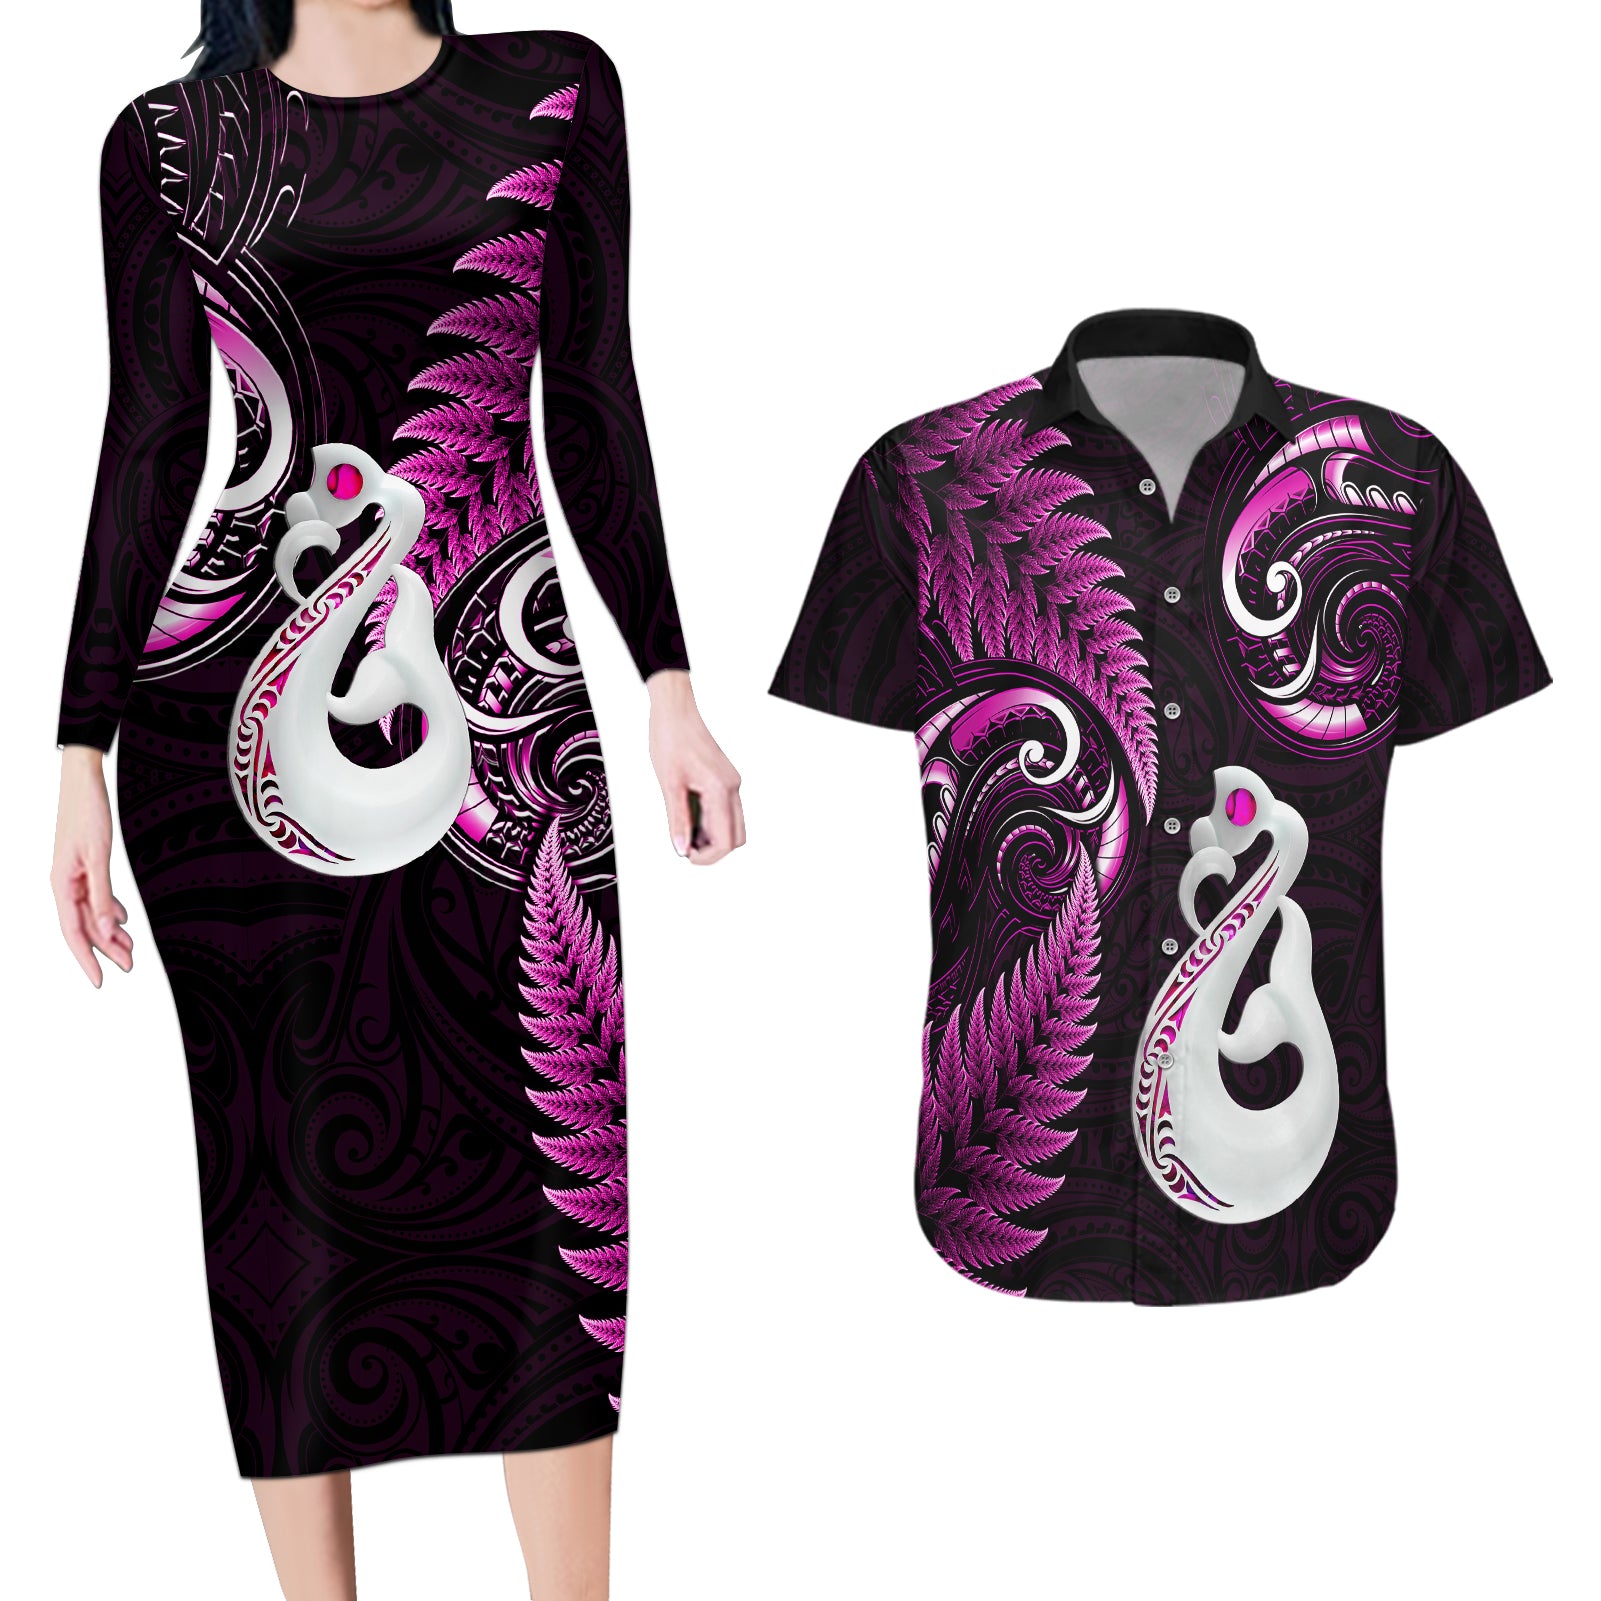 Personalised New Zealand Couples Long Sleeve Bodycon Dress and Hawaiian Shirt Aotearoa Silver Fern With Manaia Maori Unique Pink LT14 Pink - Polynesian Pride